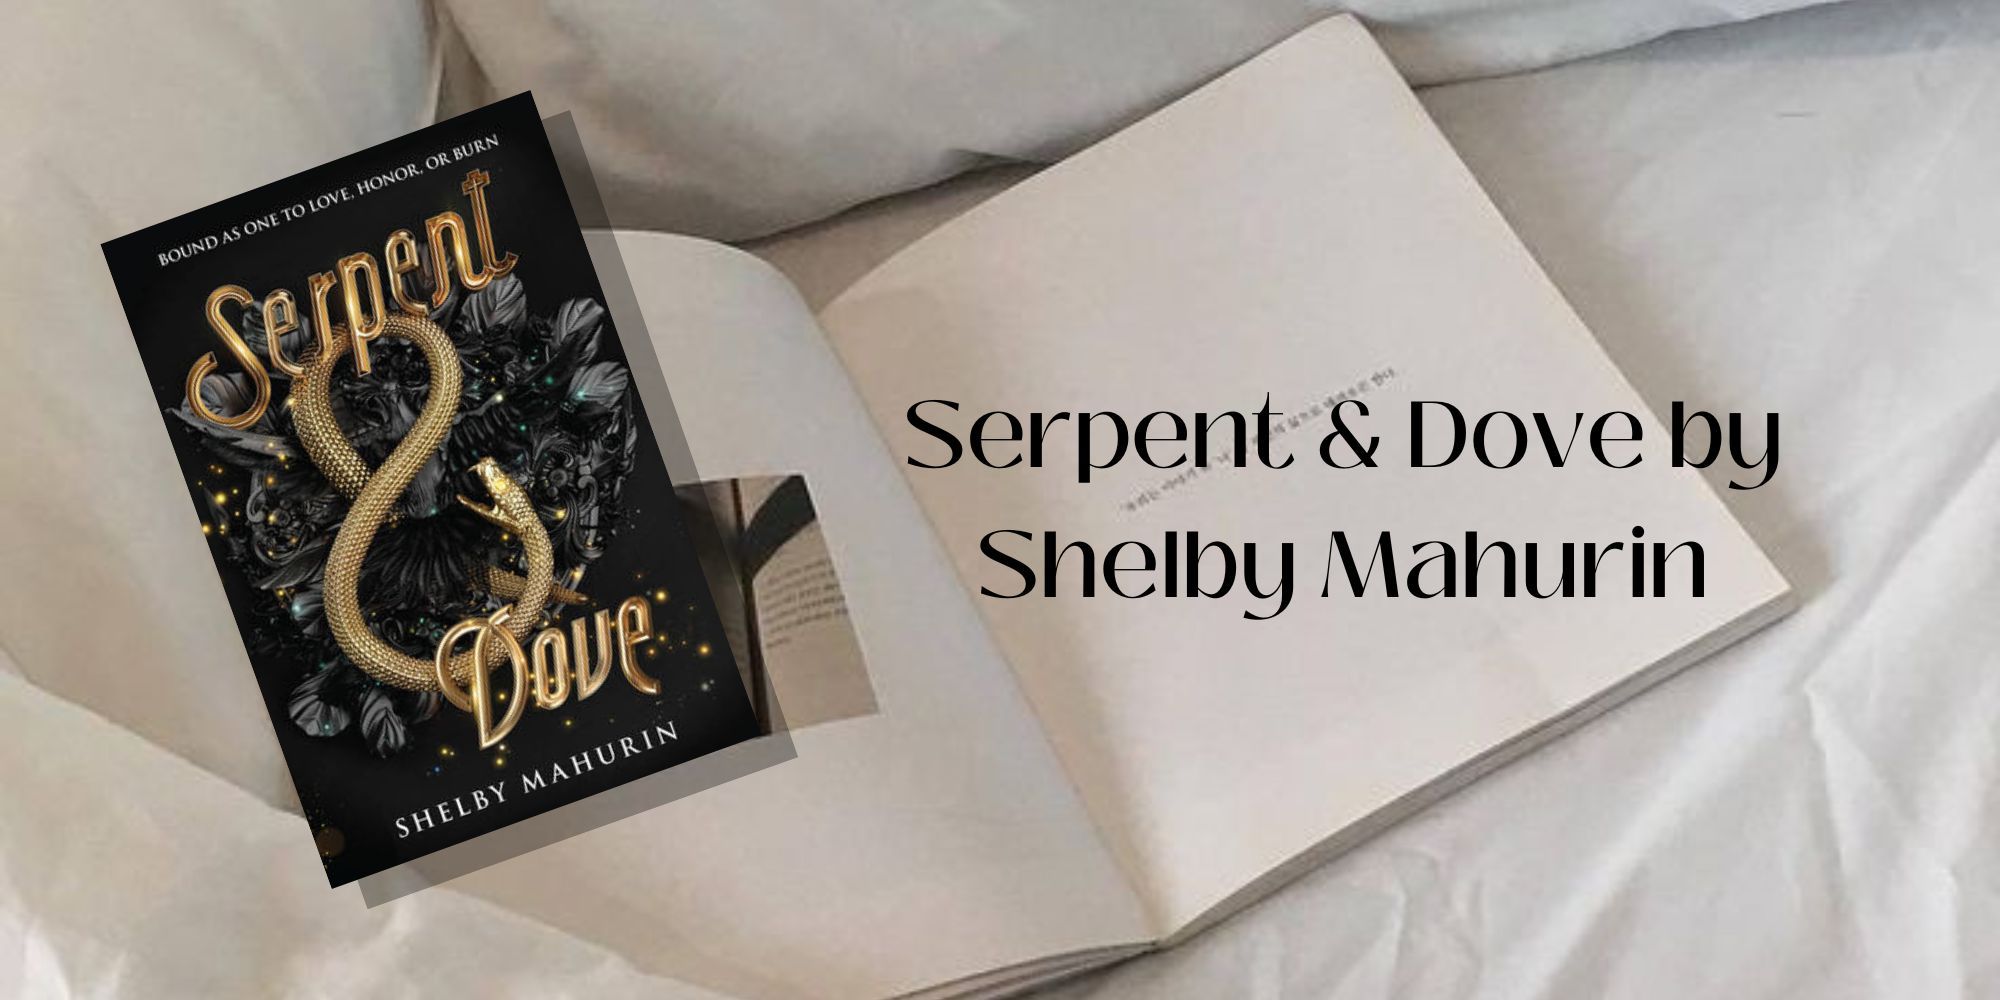 The cover of Serpent & Dove by Shelby Mahurin